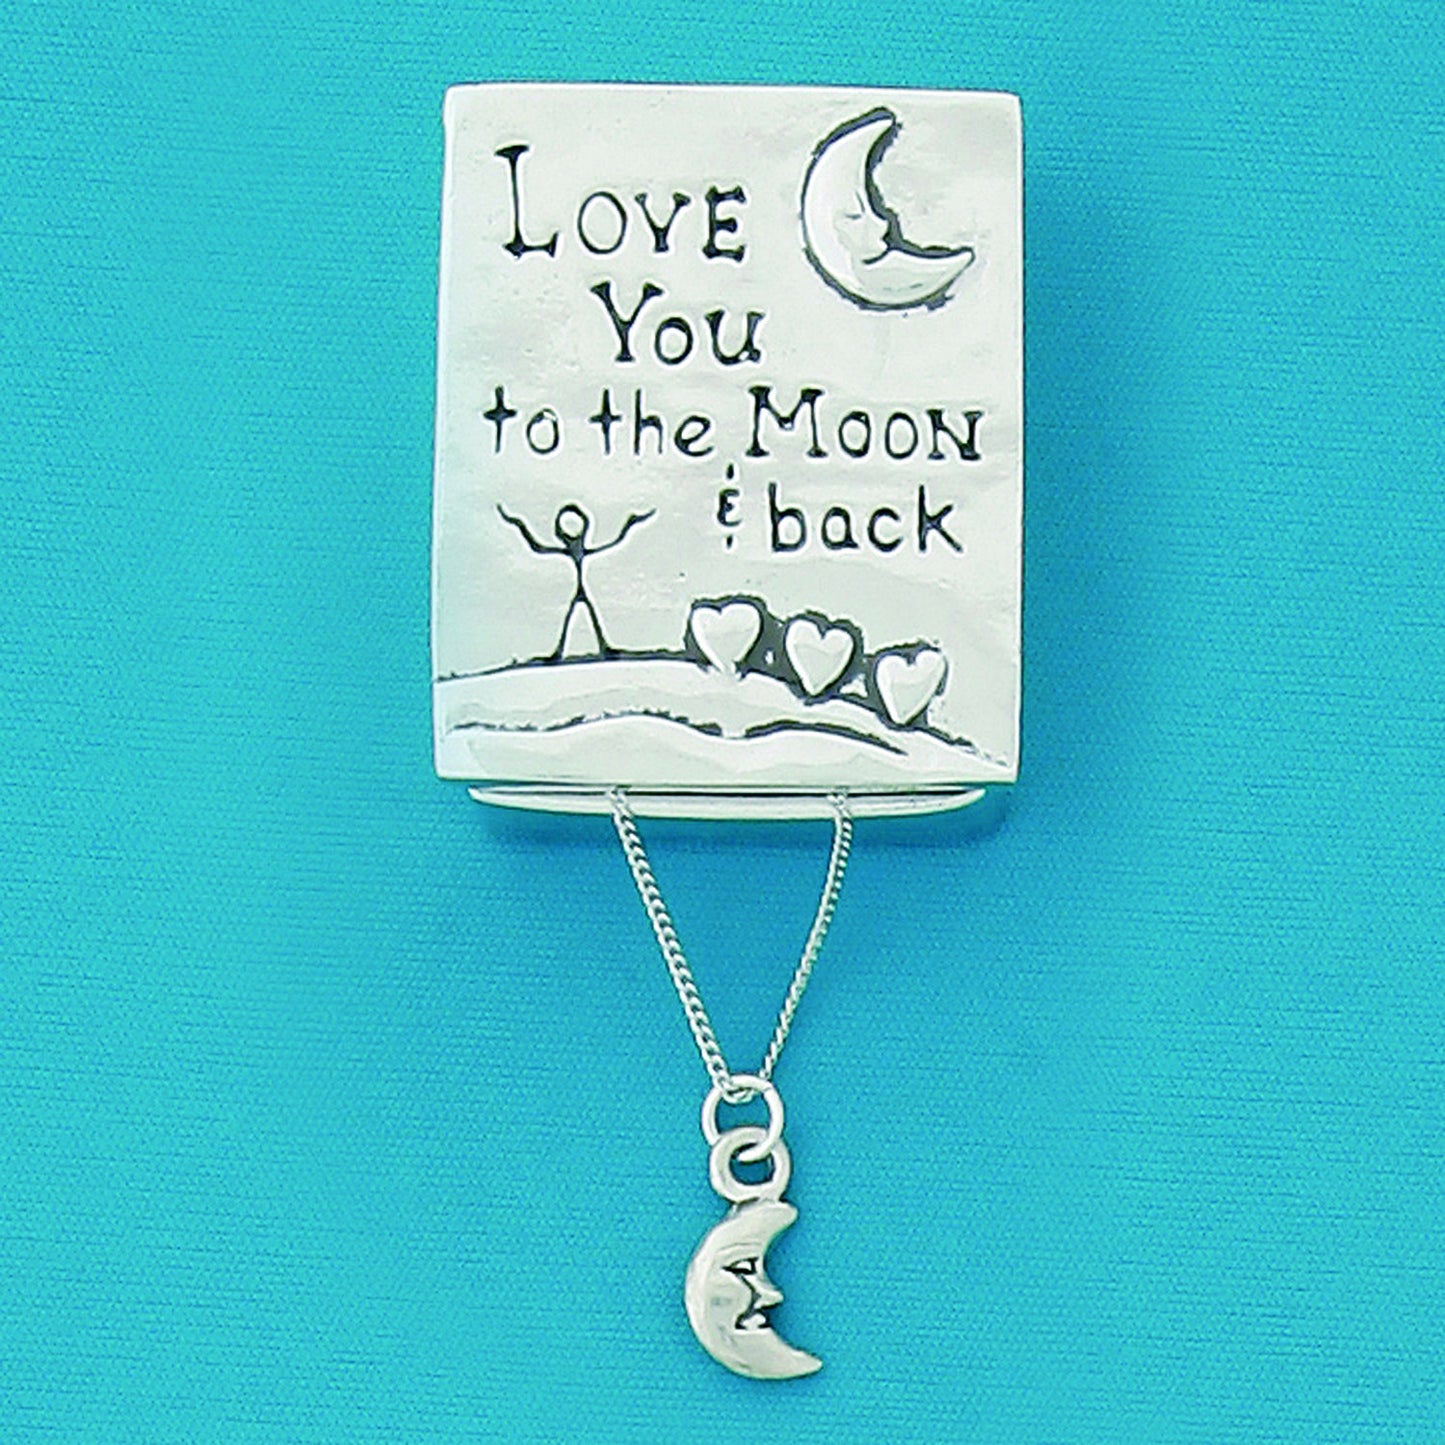 Pewter Wish Box and Necklace "Love You To The Moon And Back" and Man In The Moon